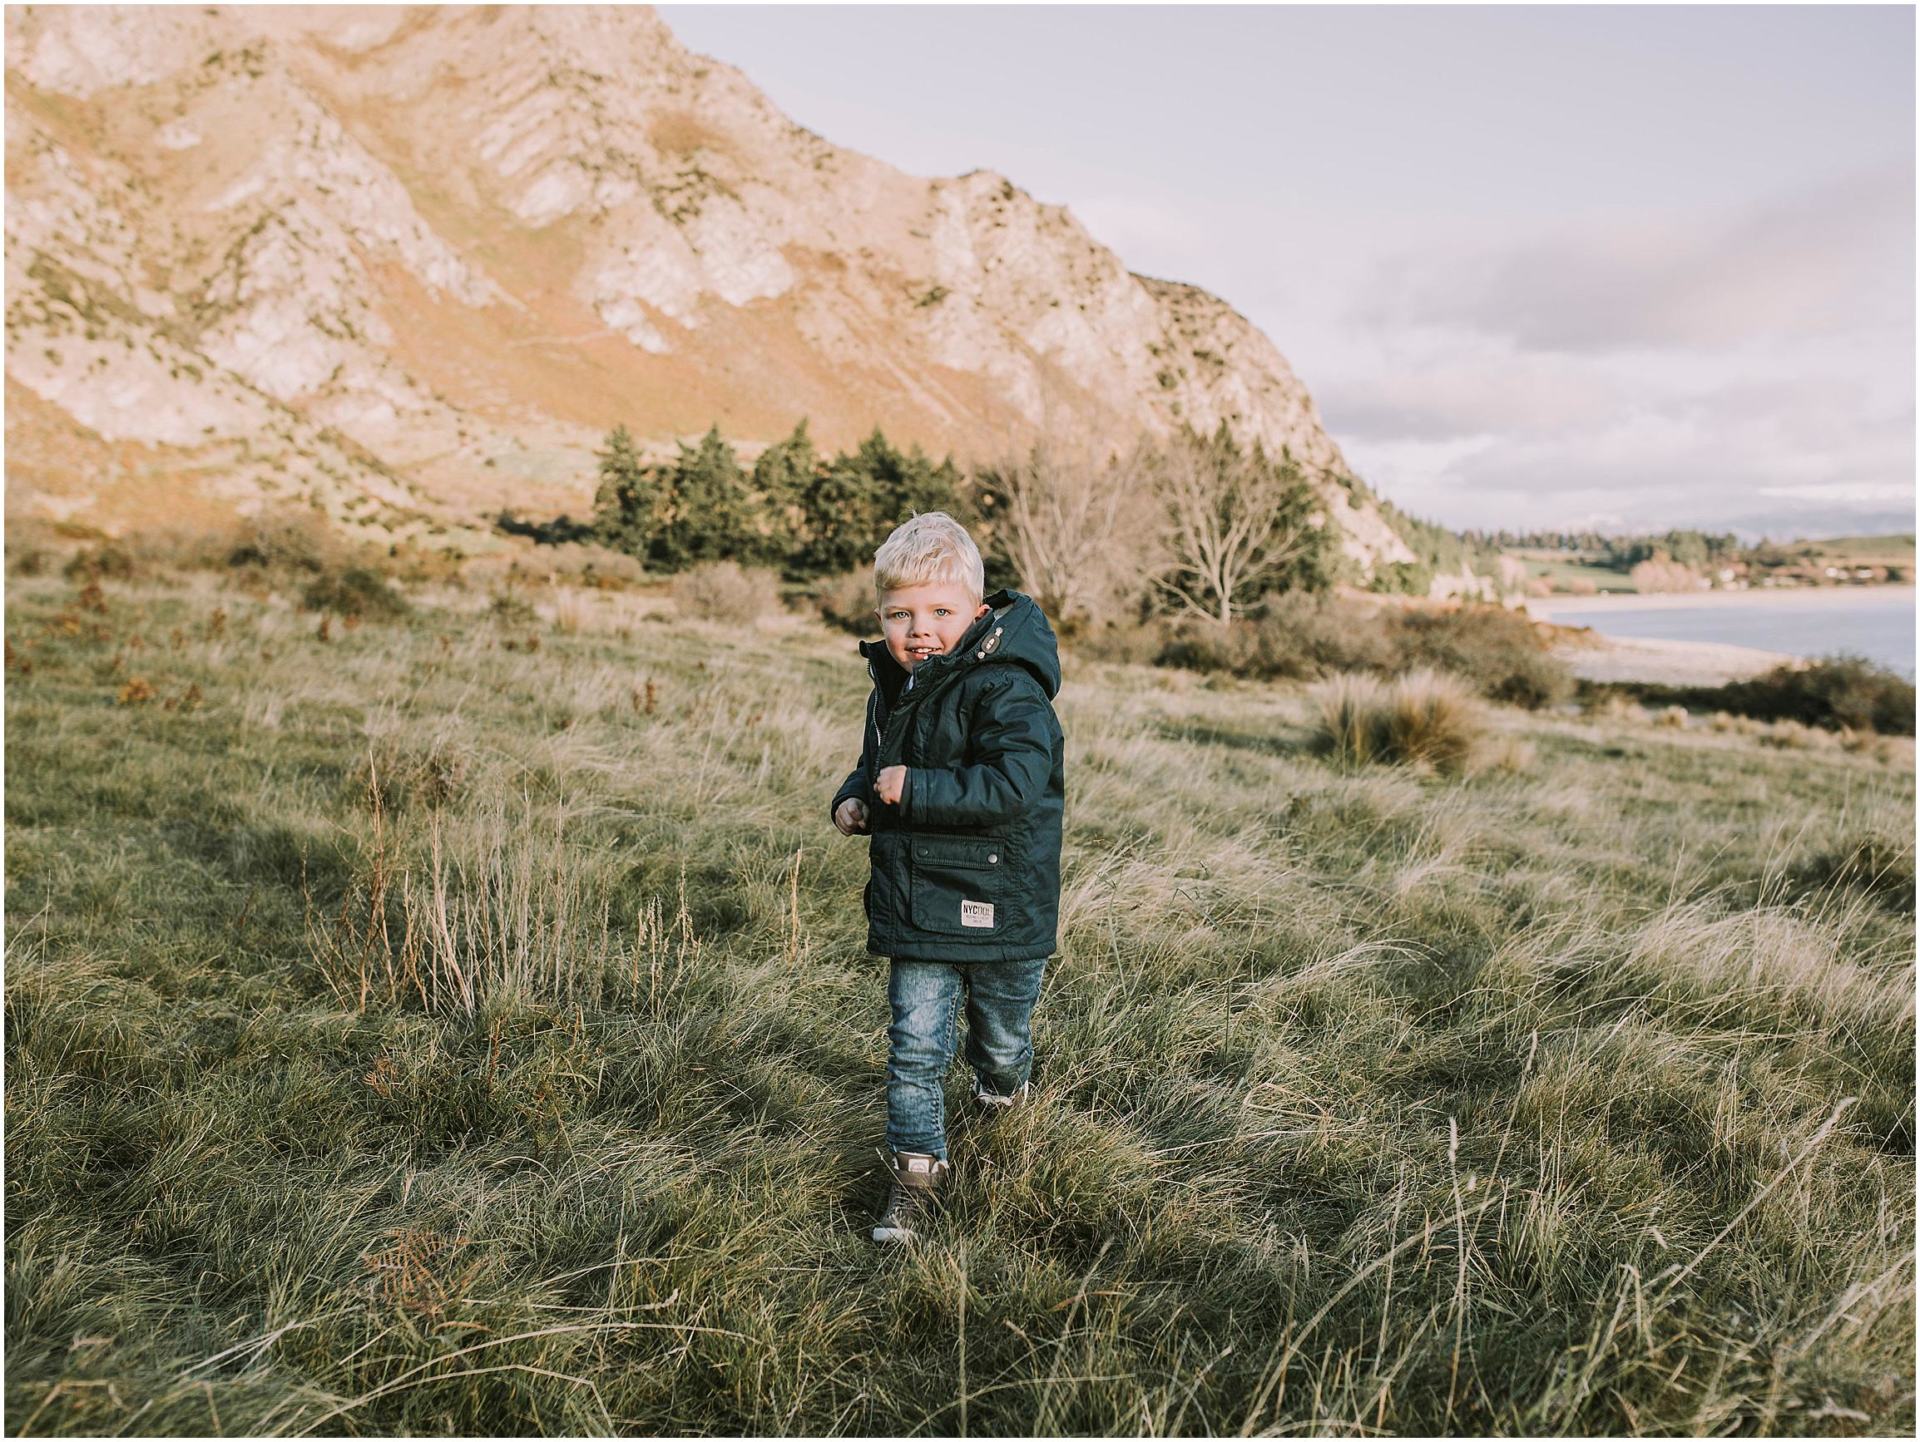 Charlotte Kiri Photography - Family Photography of a toddler running joyfully in a field on the edge of a lake in front of a mountain in Wanaka, New Zealand.